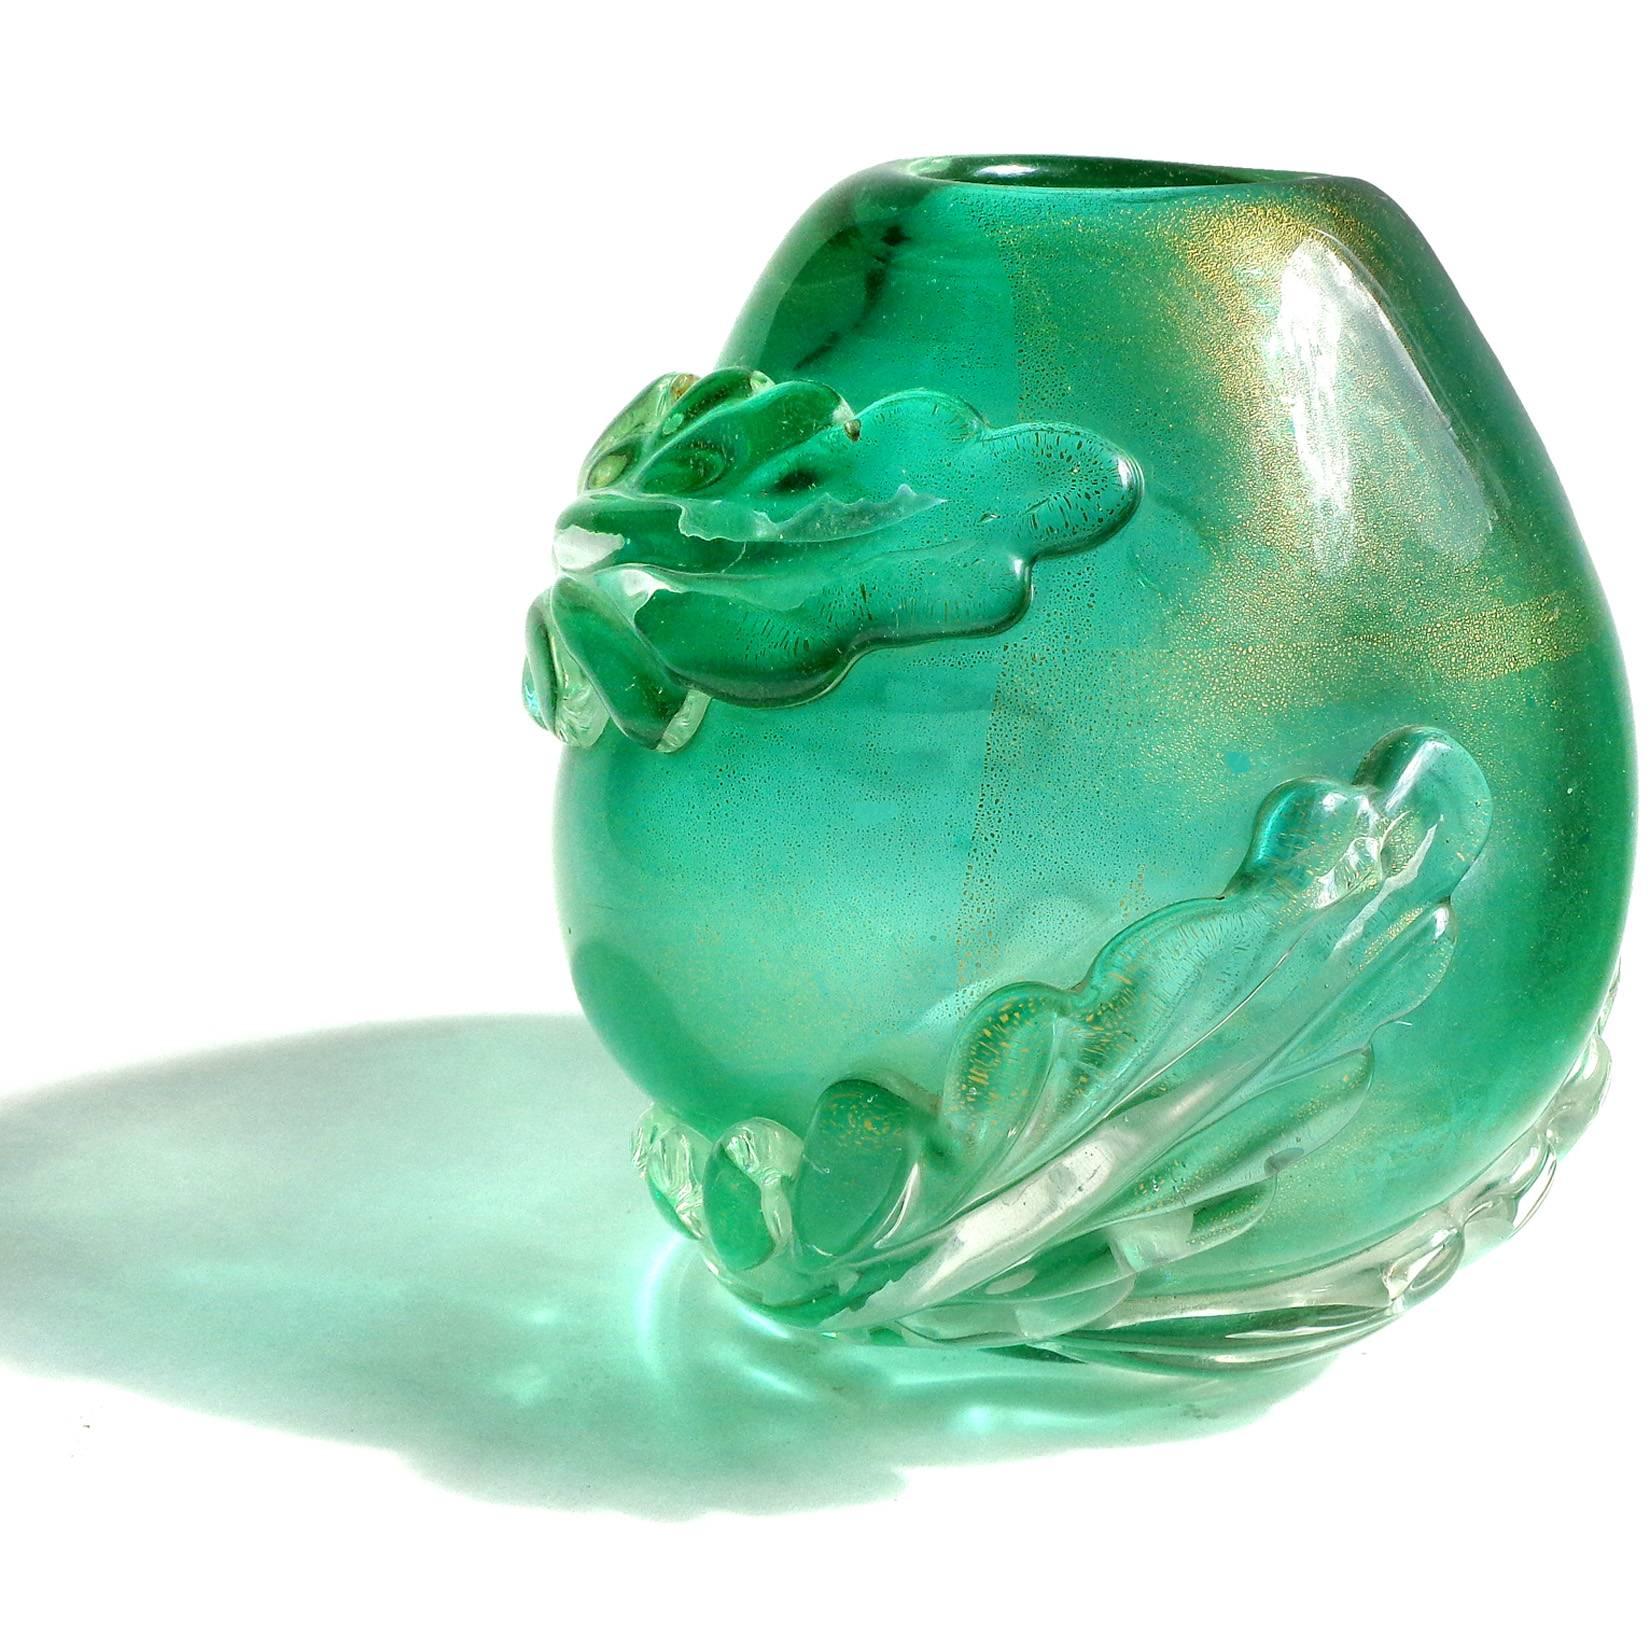 Free shipping worldwide! See details below description.

Rare Murano handblown green and gold flecks art glass egg shaped flower vase with 3 large applied leafs. Attributed to the Seguso Vetri d'Arte company. The piece is very heavy, and profusely